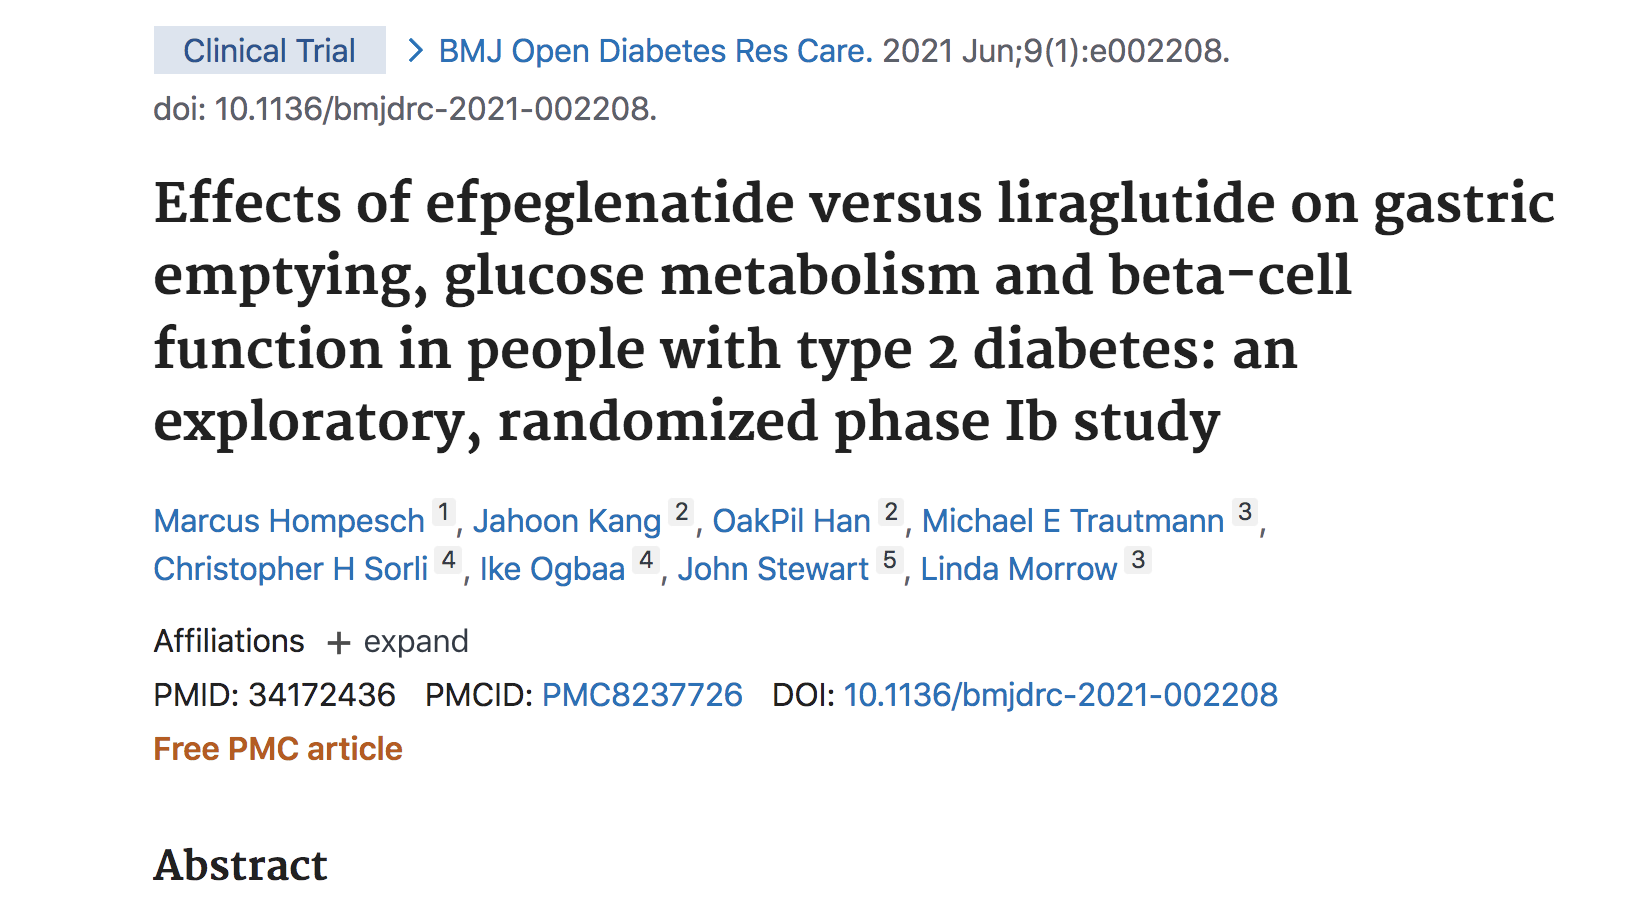 Effects of efpeglenatide versus liraglutide on gastric emptying, glucose metabolism and beta-cell function in people with type 2 diabetes: an exploratory, randomized phase Ib study. thumbnail